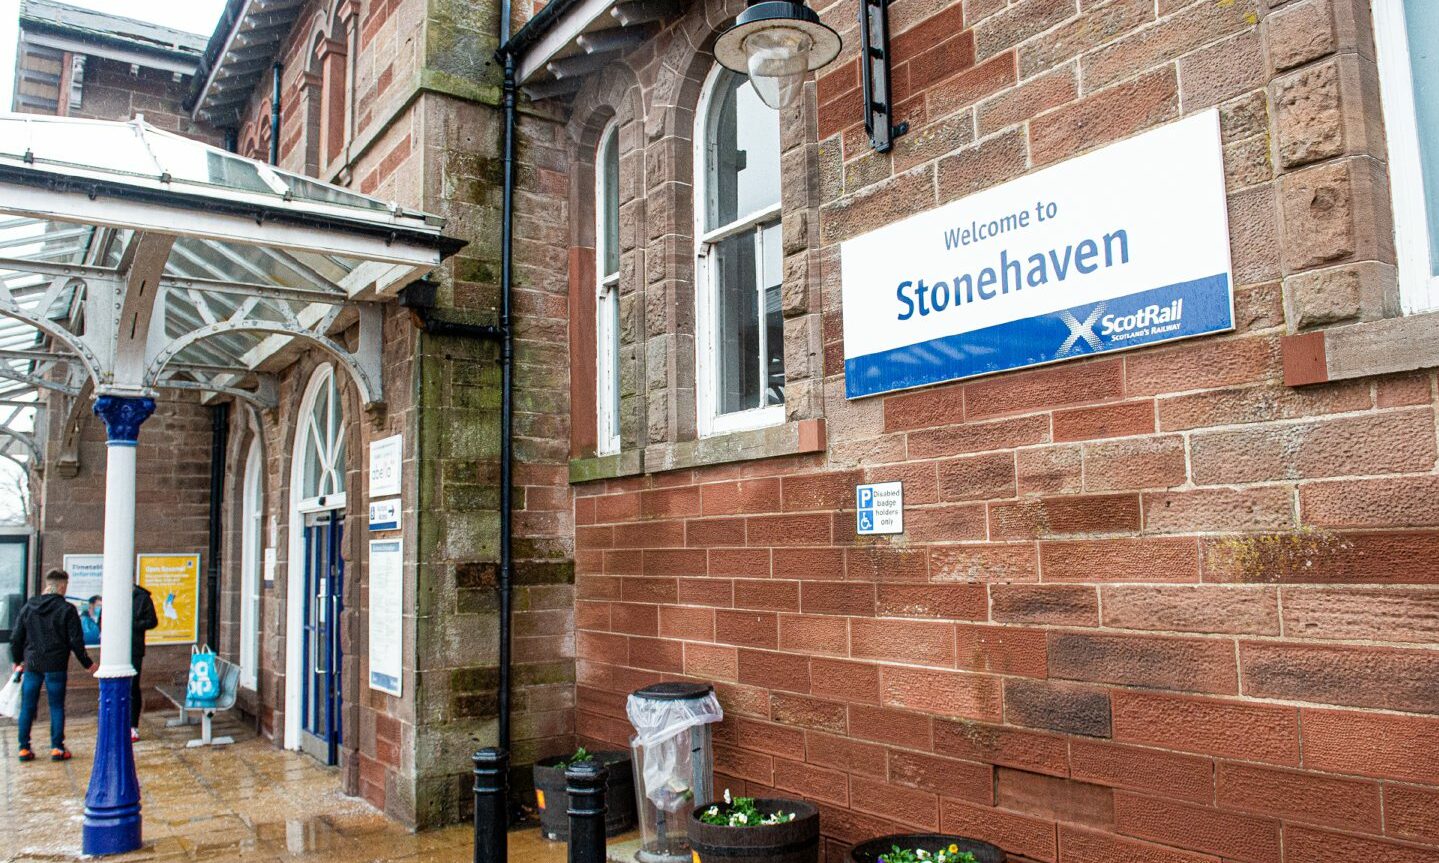 Stonehaven railway station with a sign reading "welcome to Stonehaven" on the wall